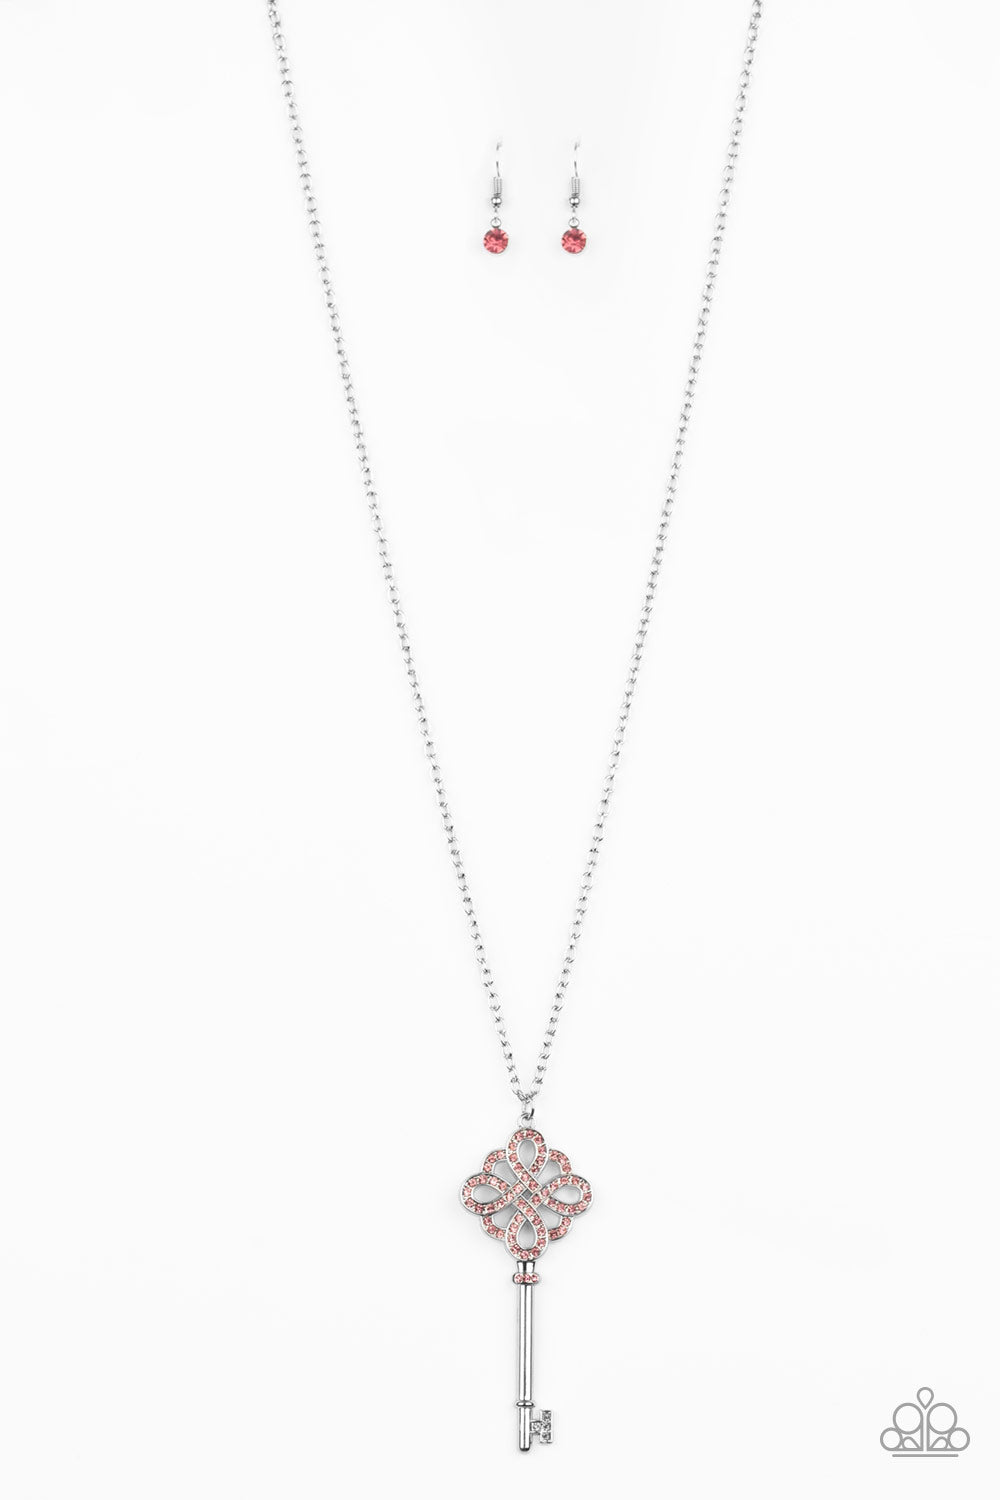 Paparazzi LoP May 2020Necklace -Unlocked - Pink (#1792)